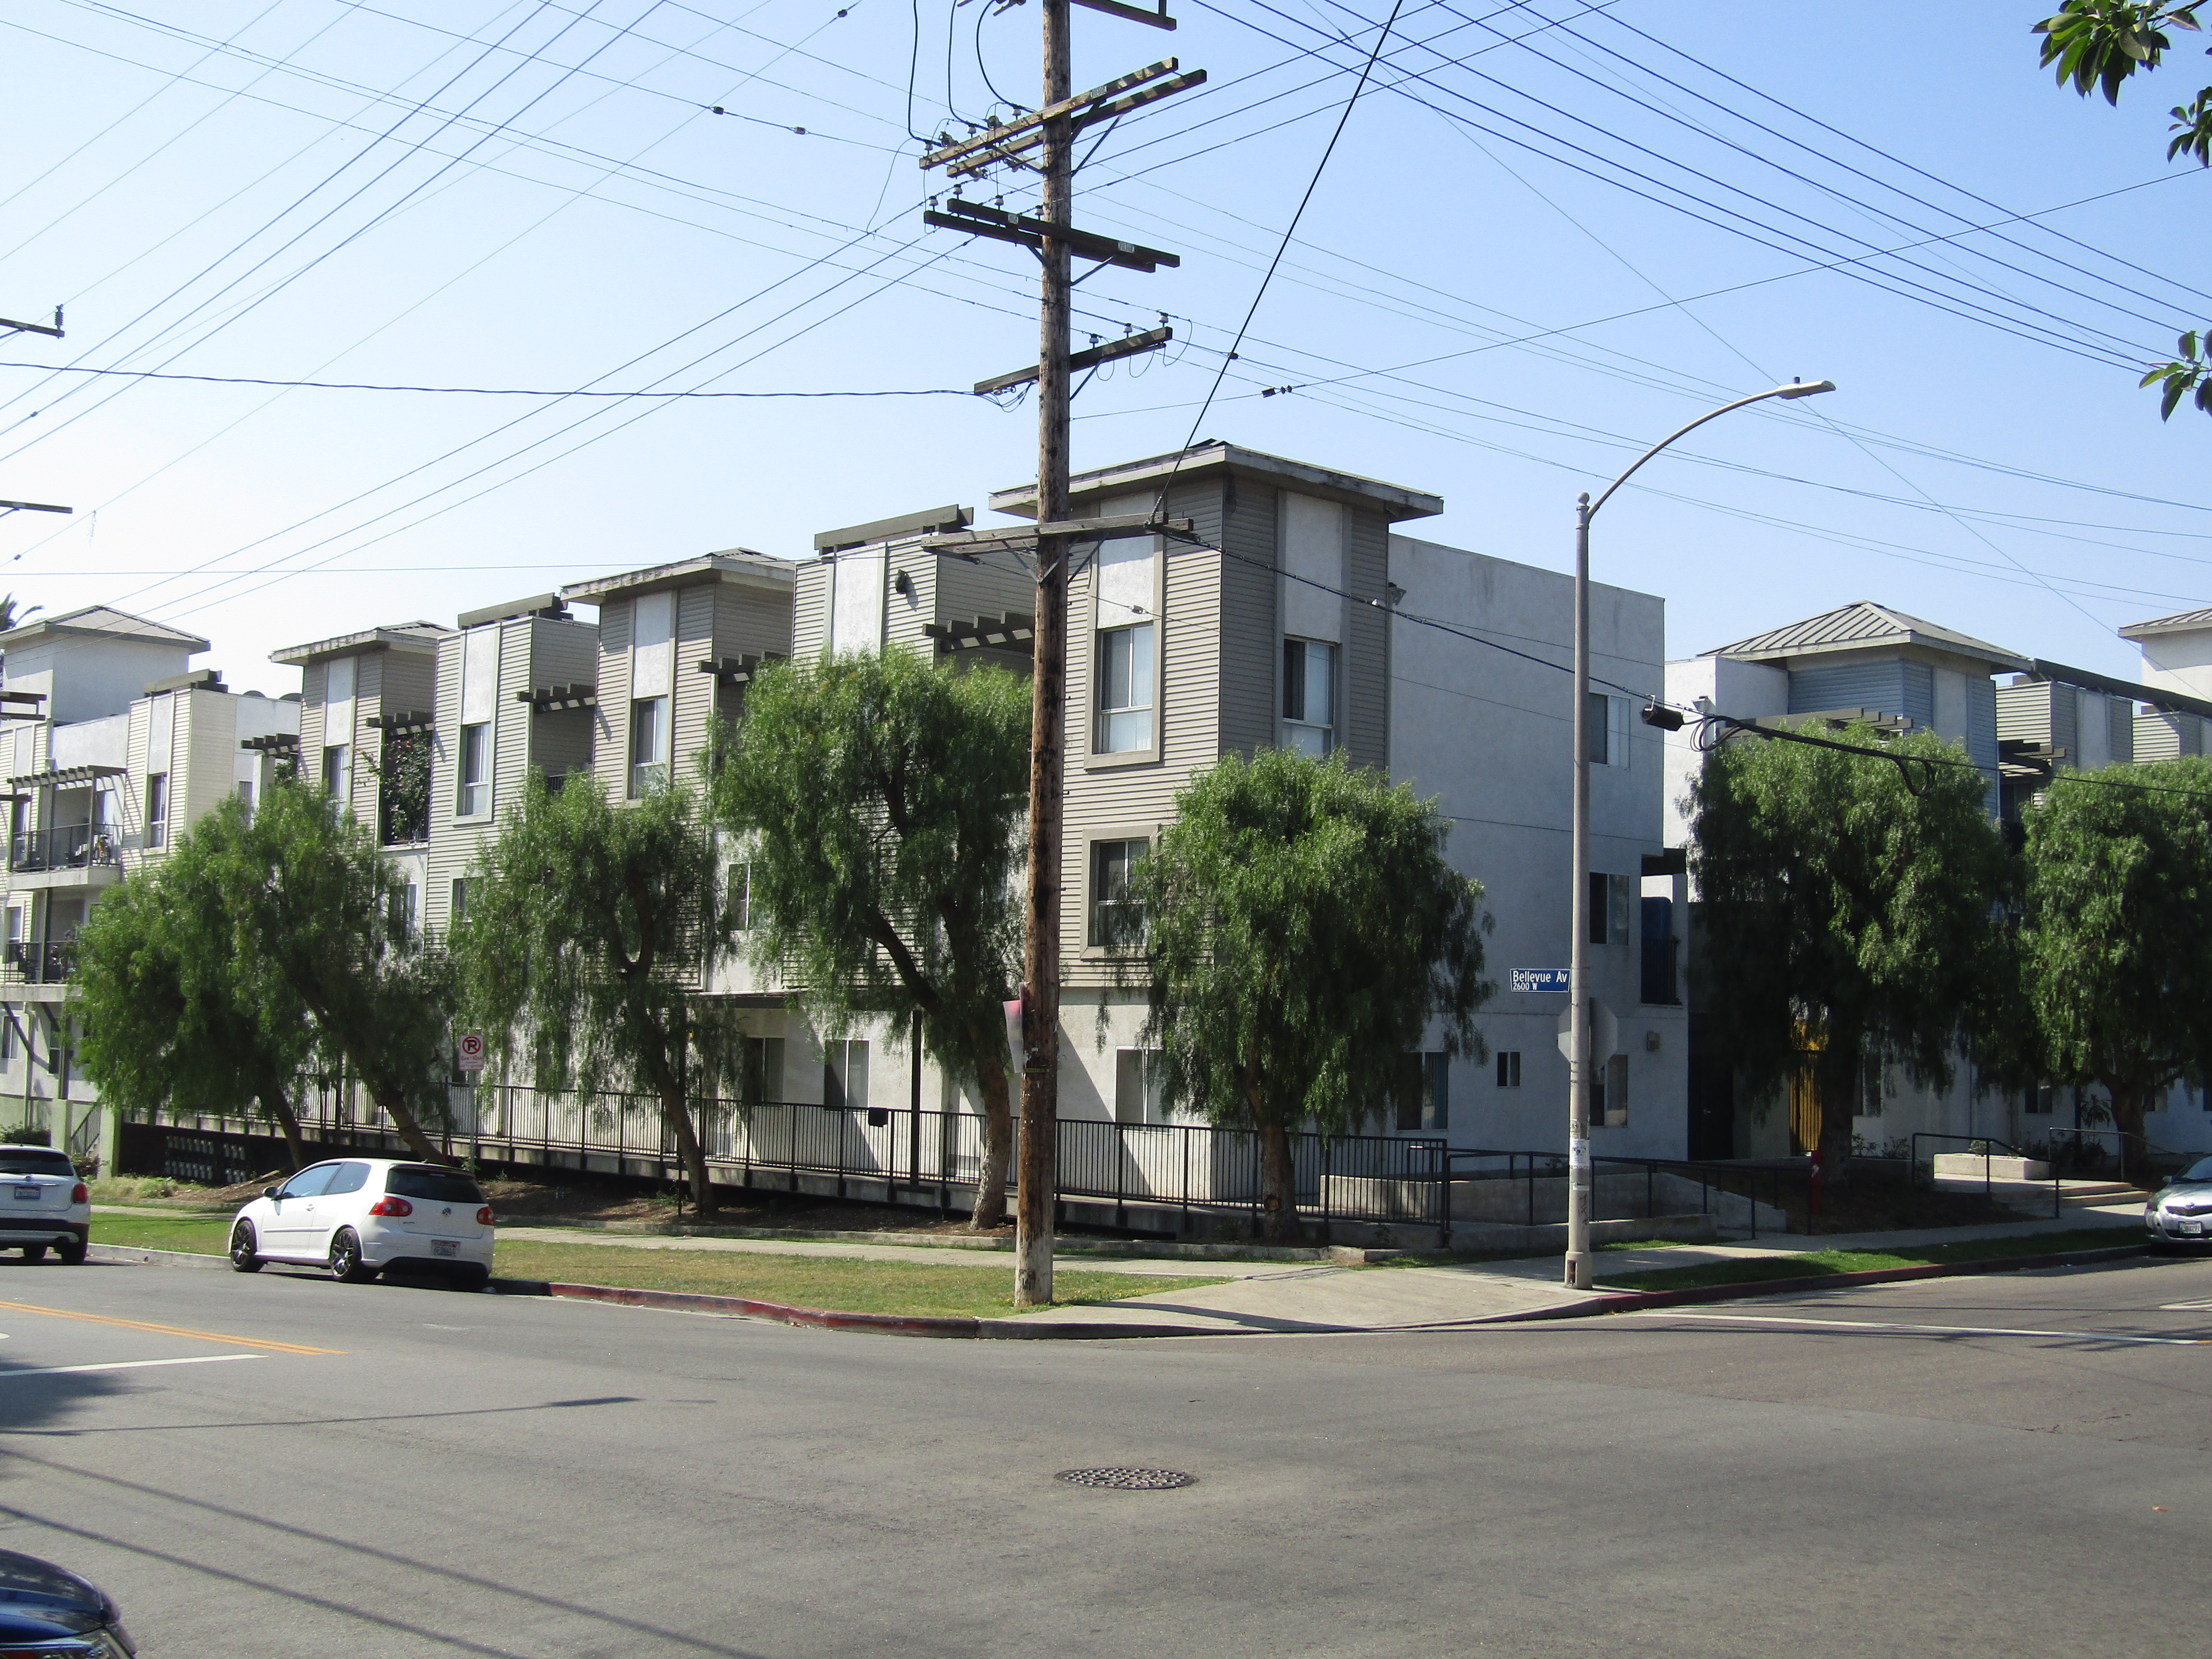 Street view of a three story apartment complez divided into several buildings